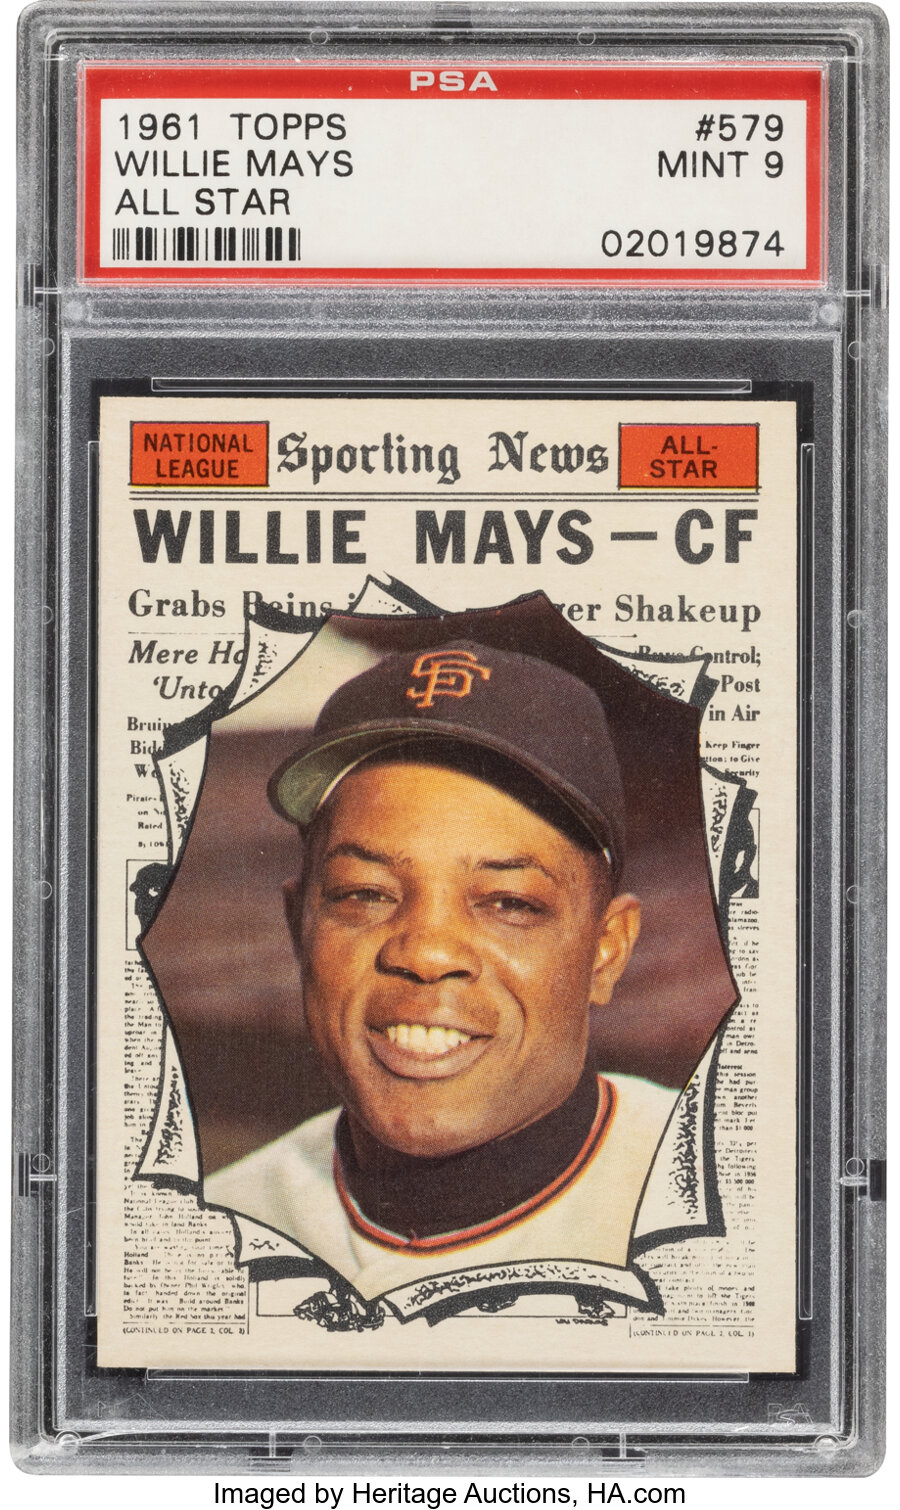 1961 Topps Willie Mays (All Star) #579 PSA Mint 9